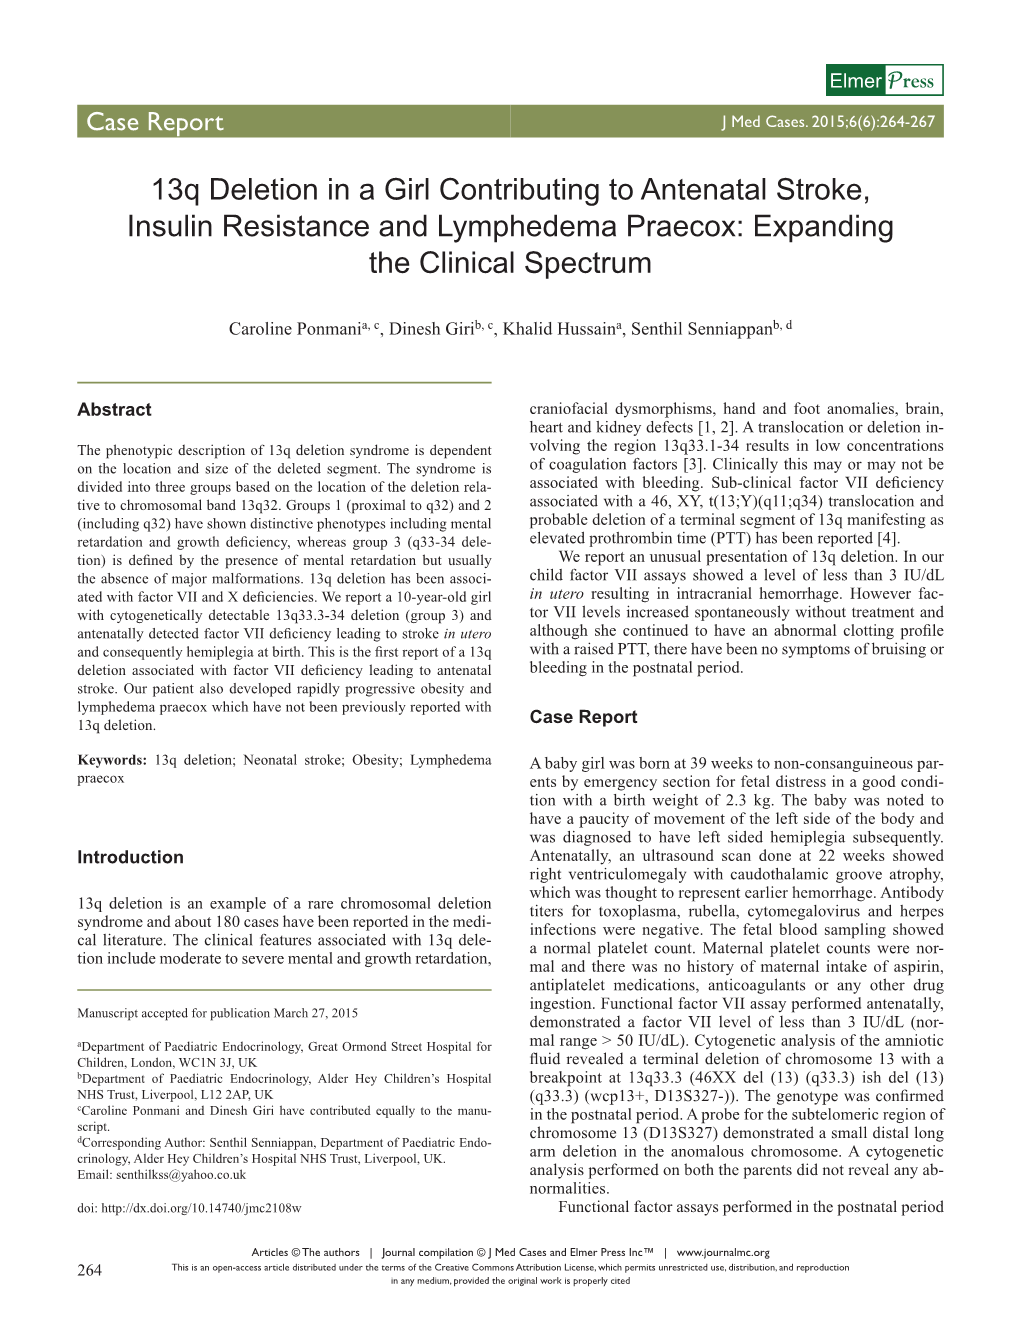 13Q Deletion in a Girl Contributing to Antenatal Stroke, Insulin Resistance and Lymphedema Praecox: Expanding the Clinical Spectrum